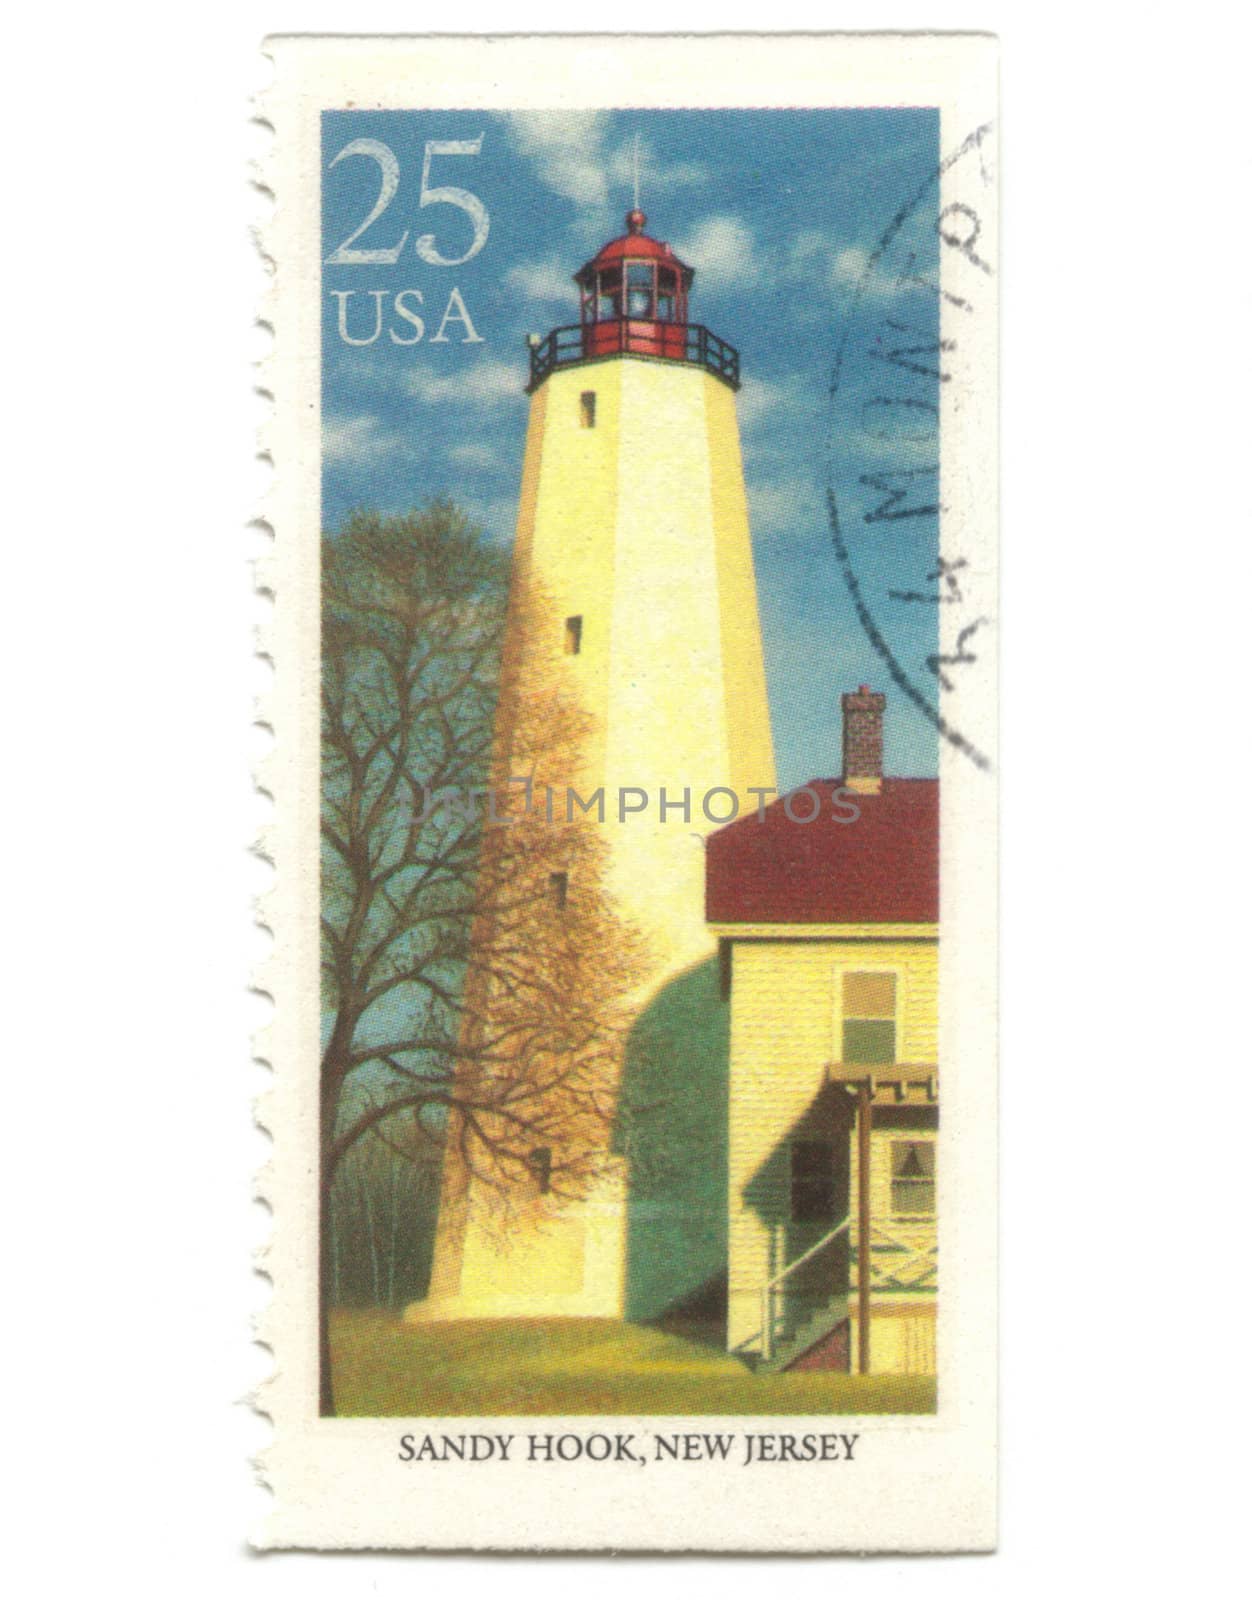 Old postage stamp from USA with Lighthouse  by fambros